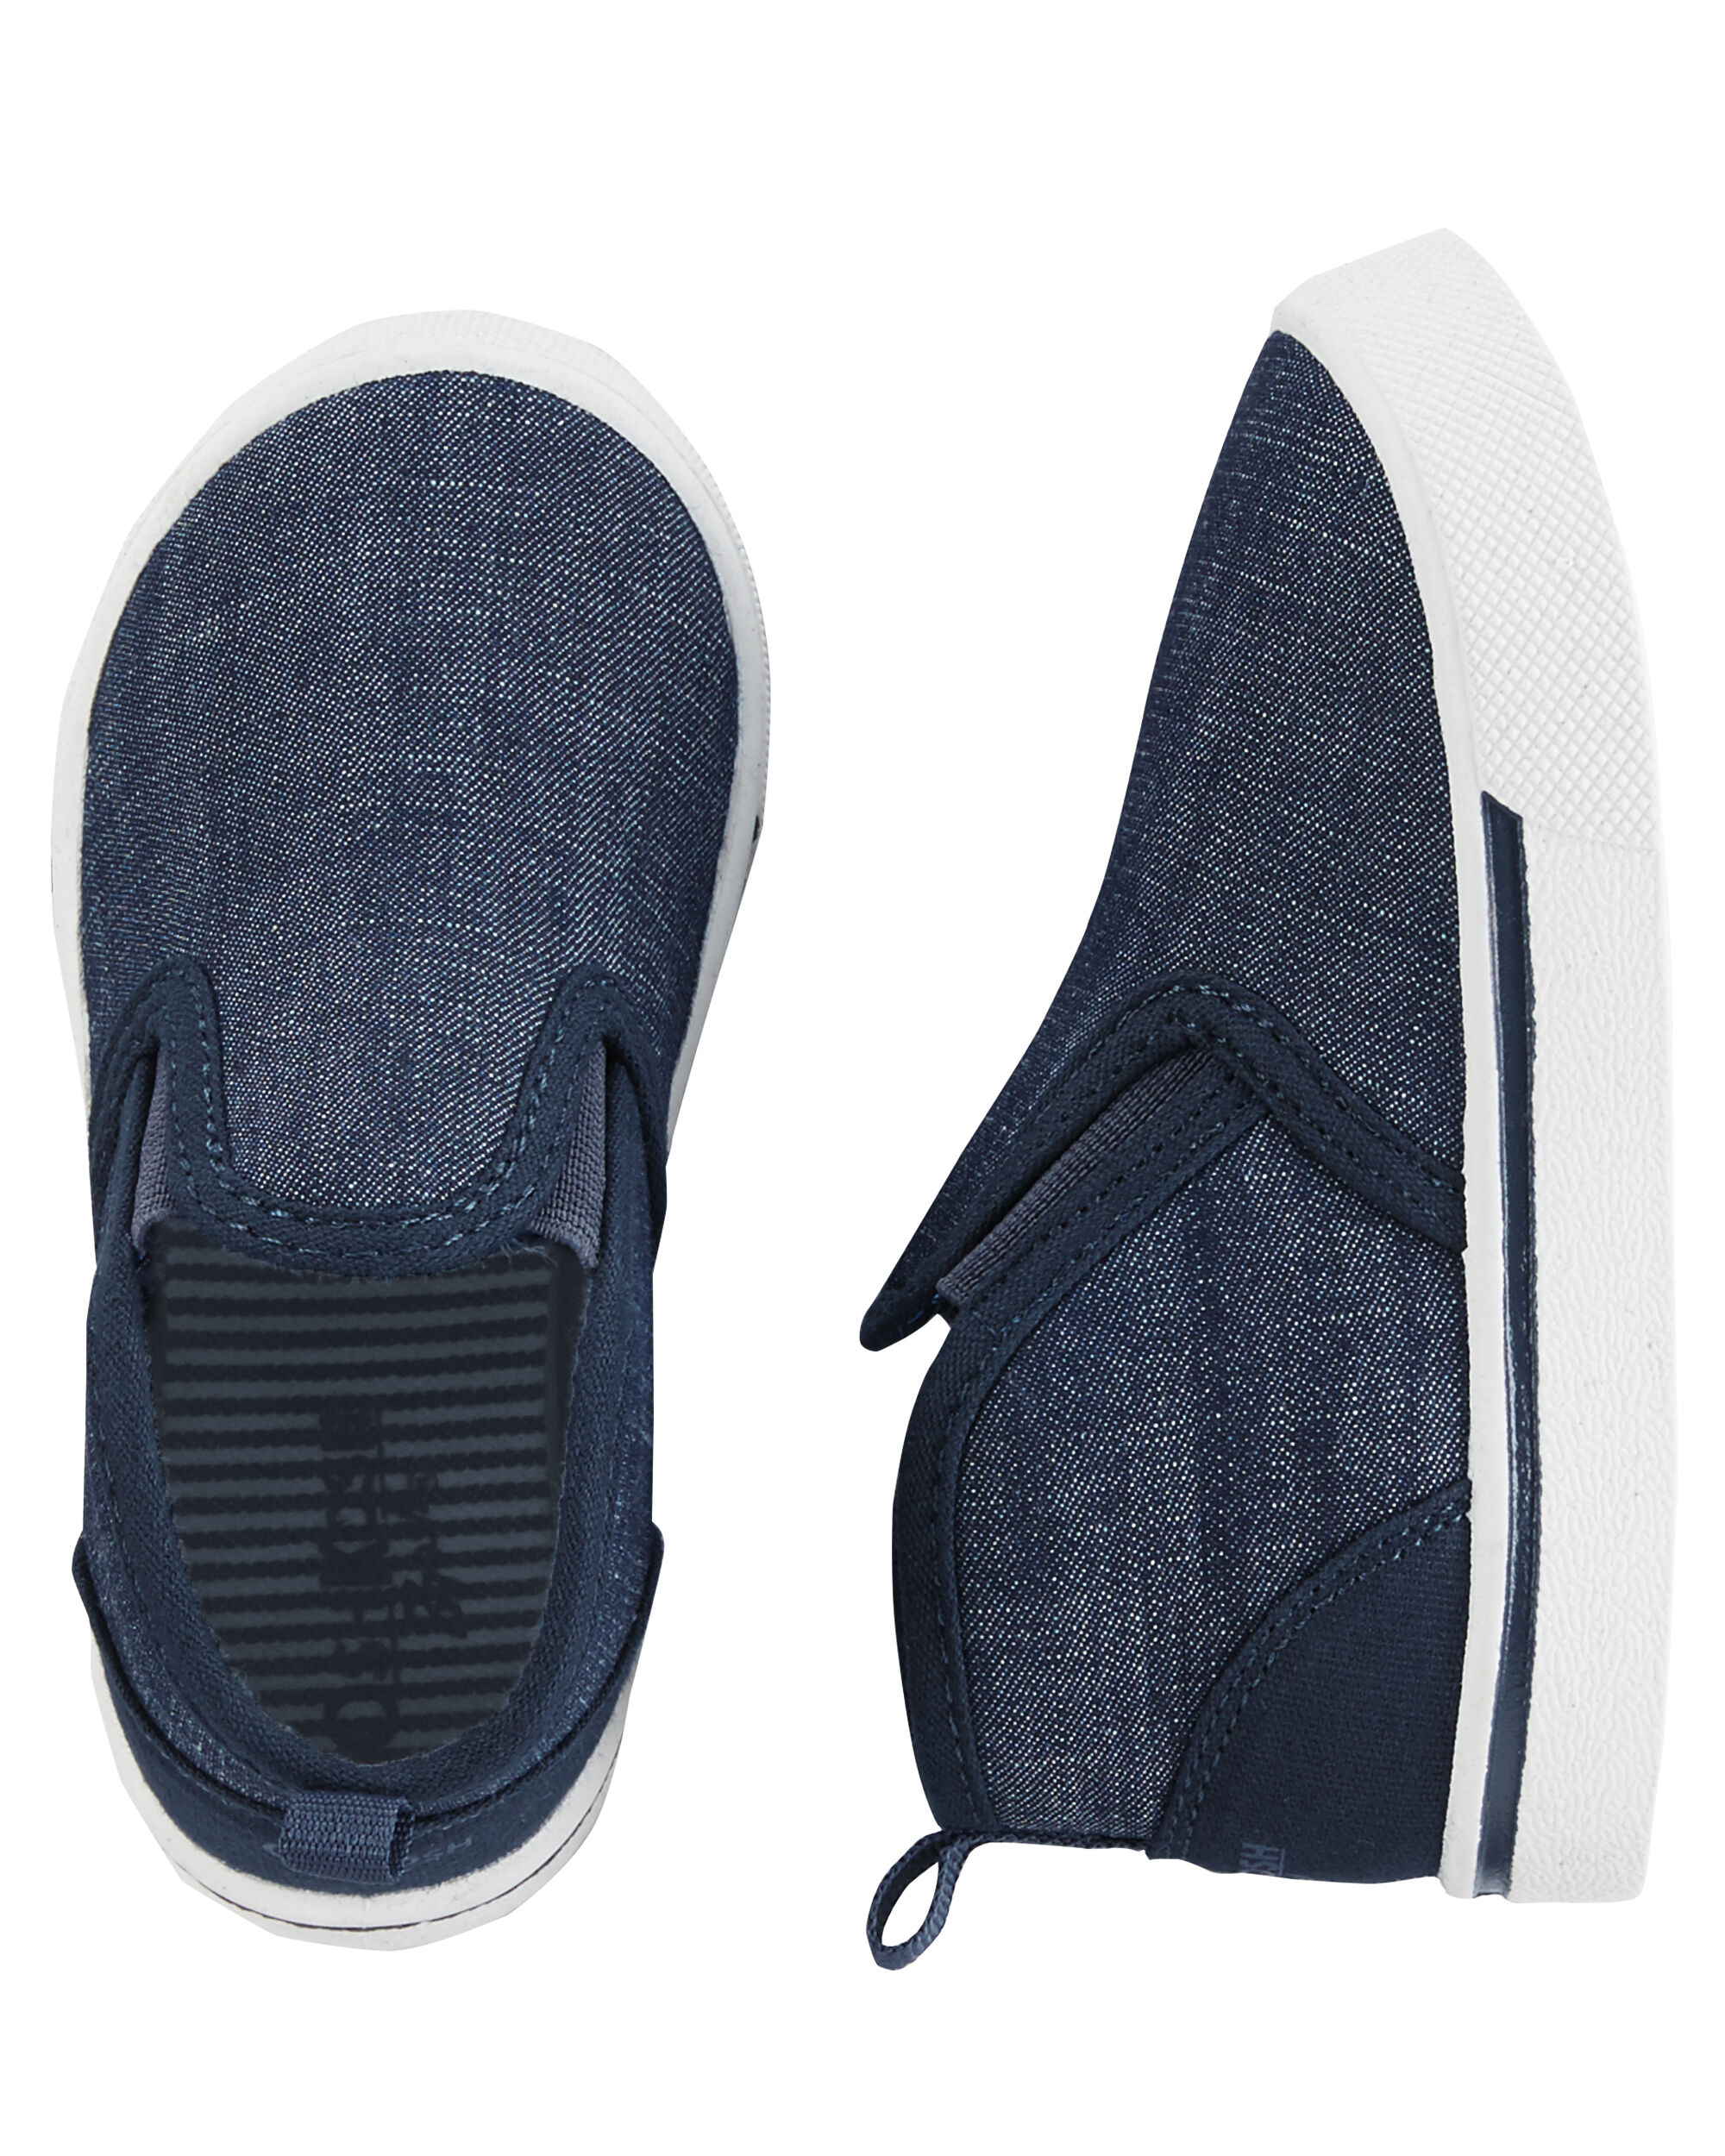 chambray slip on sneakers